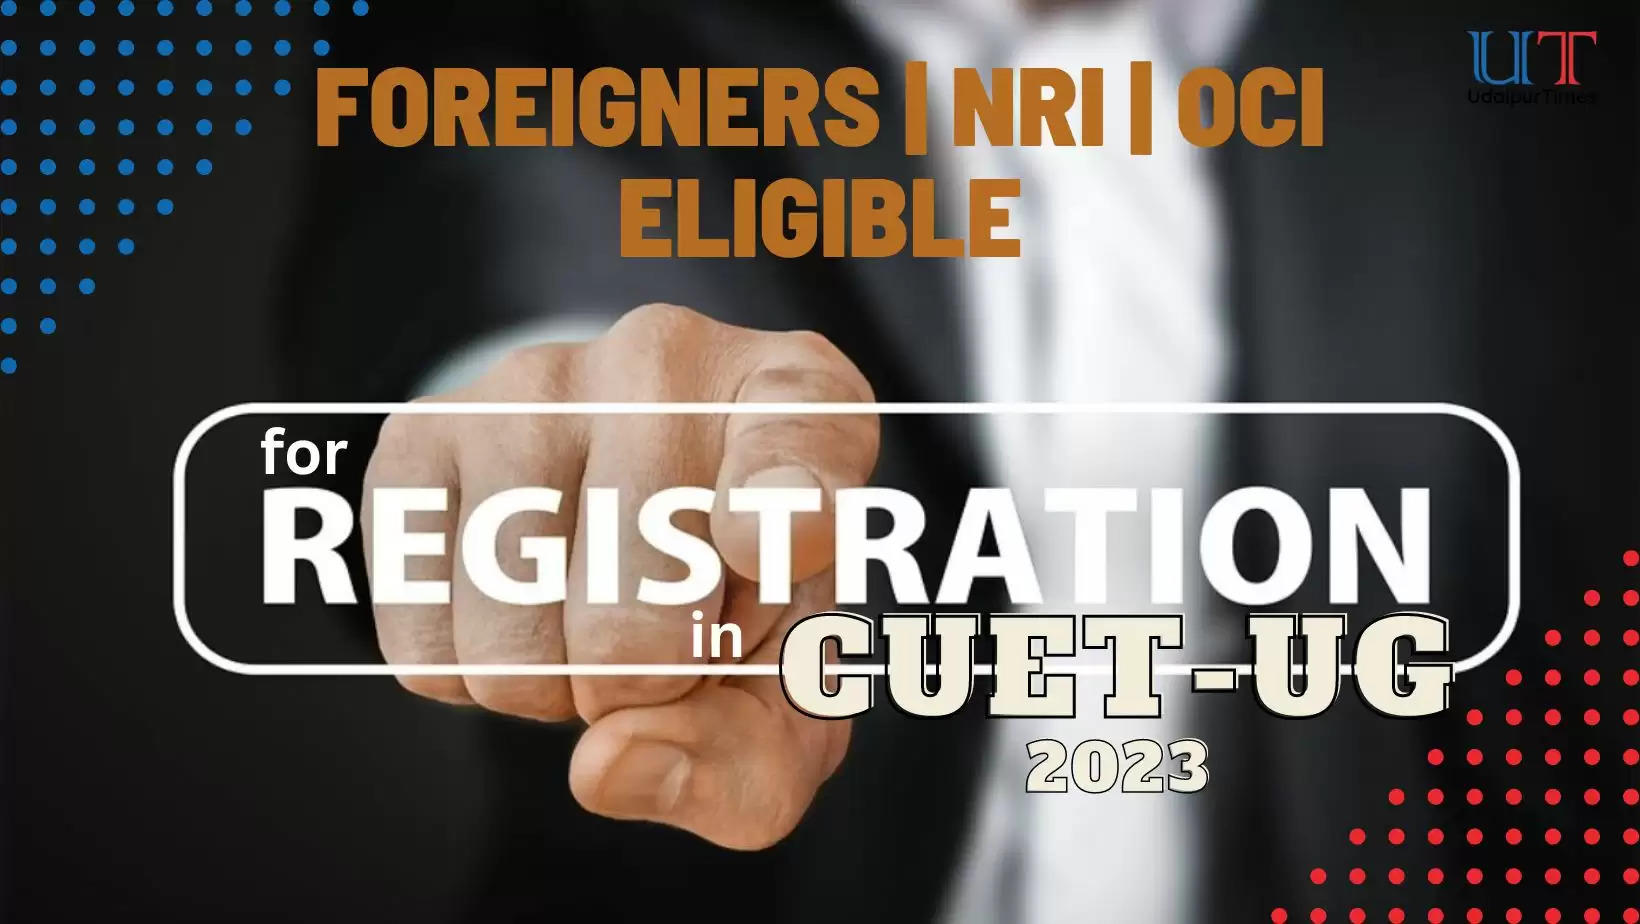 Foreigners NRI and OCI Eligible for CUET 2023 Registrations and Examination, Eligibility Criteria